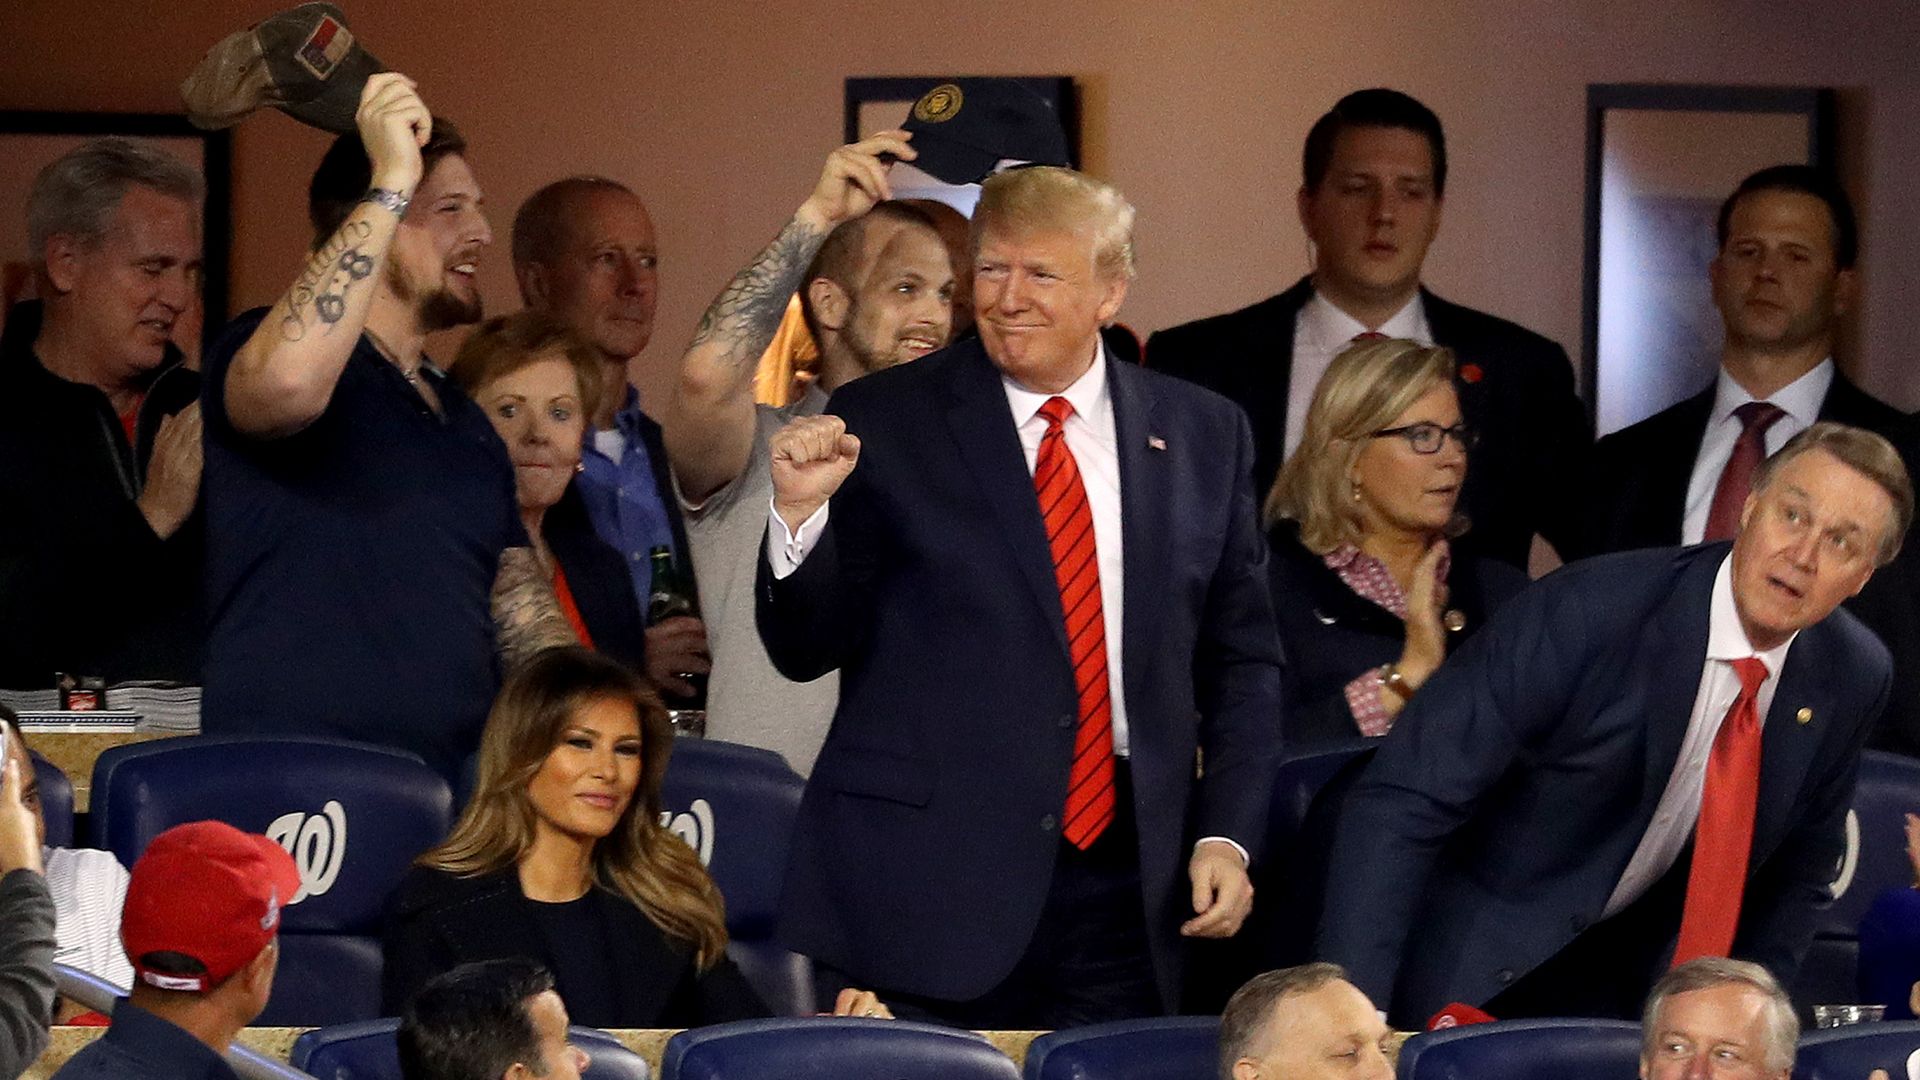 President Trump raises a fist in the stands of the Washington Nationals game.